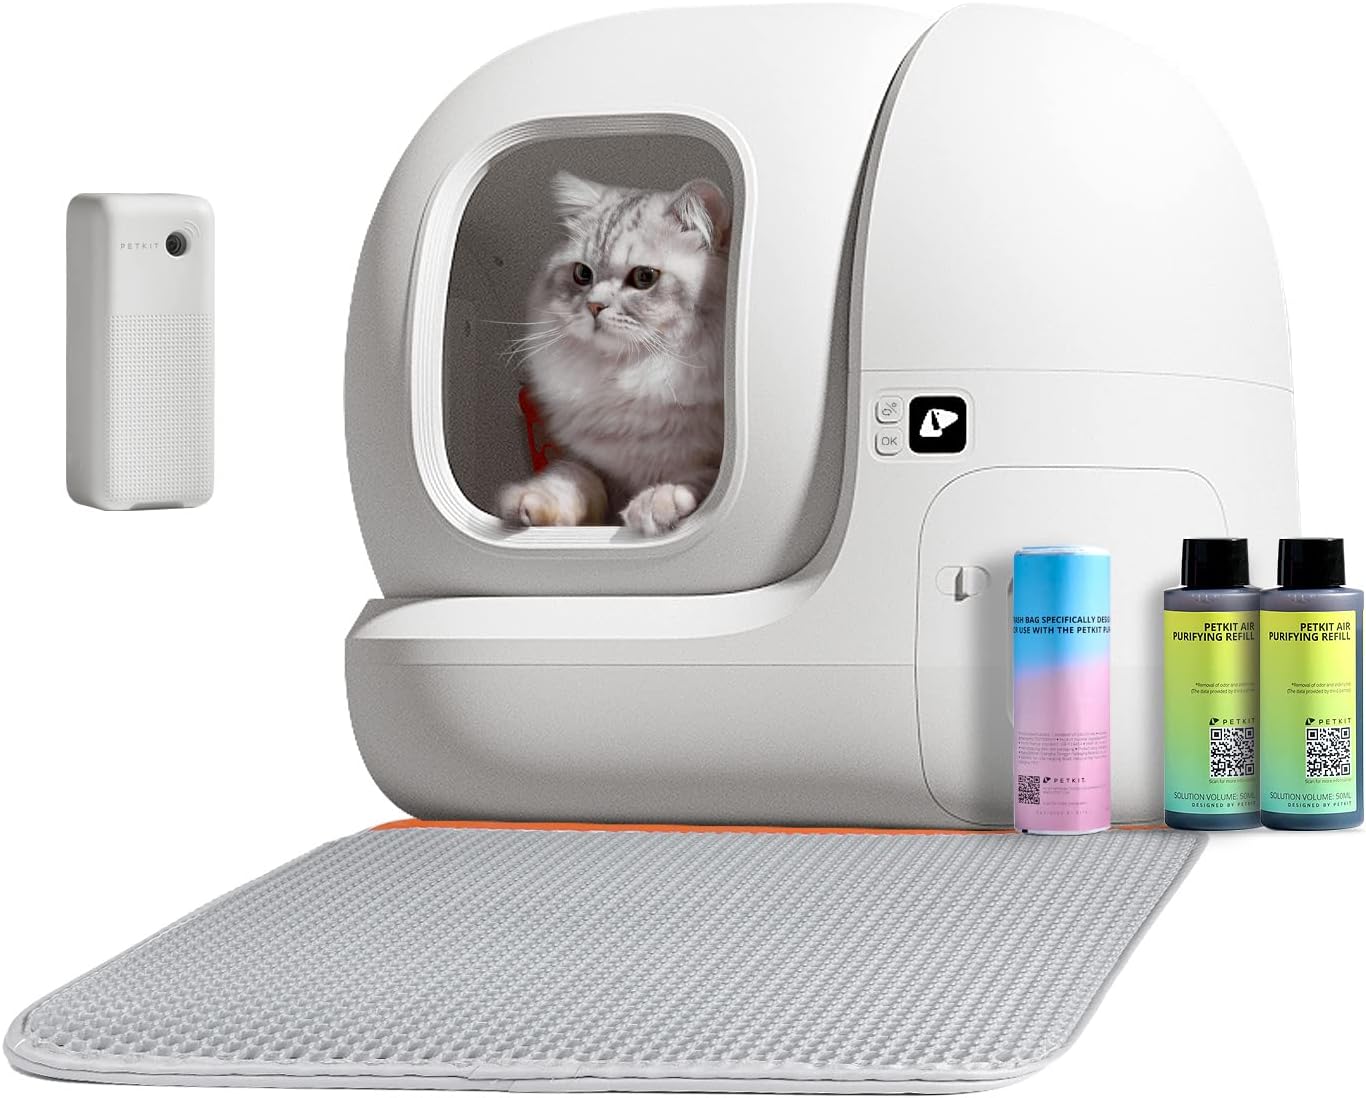 PETKIT Self Cleaning Cat Litter Box Review